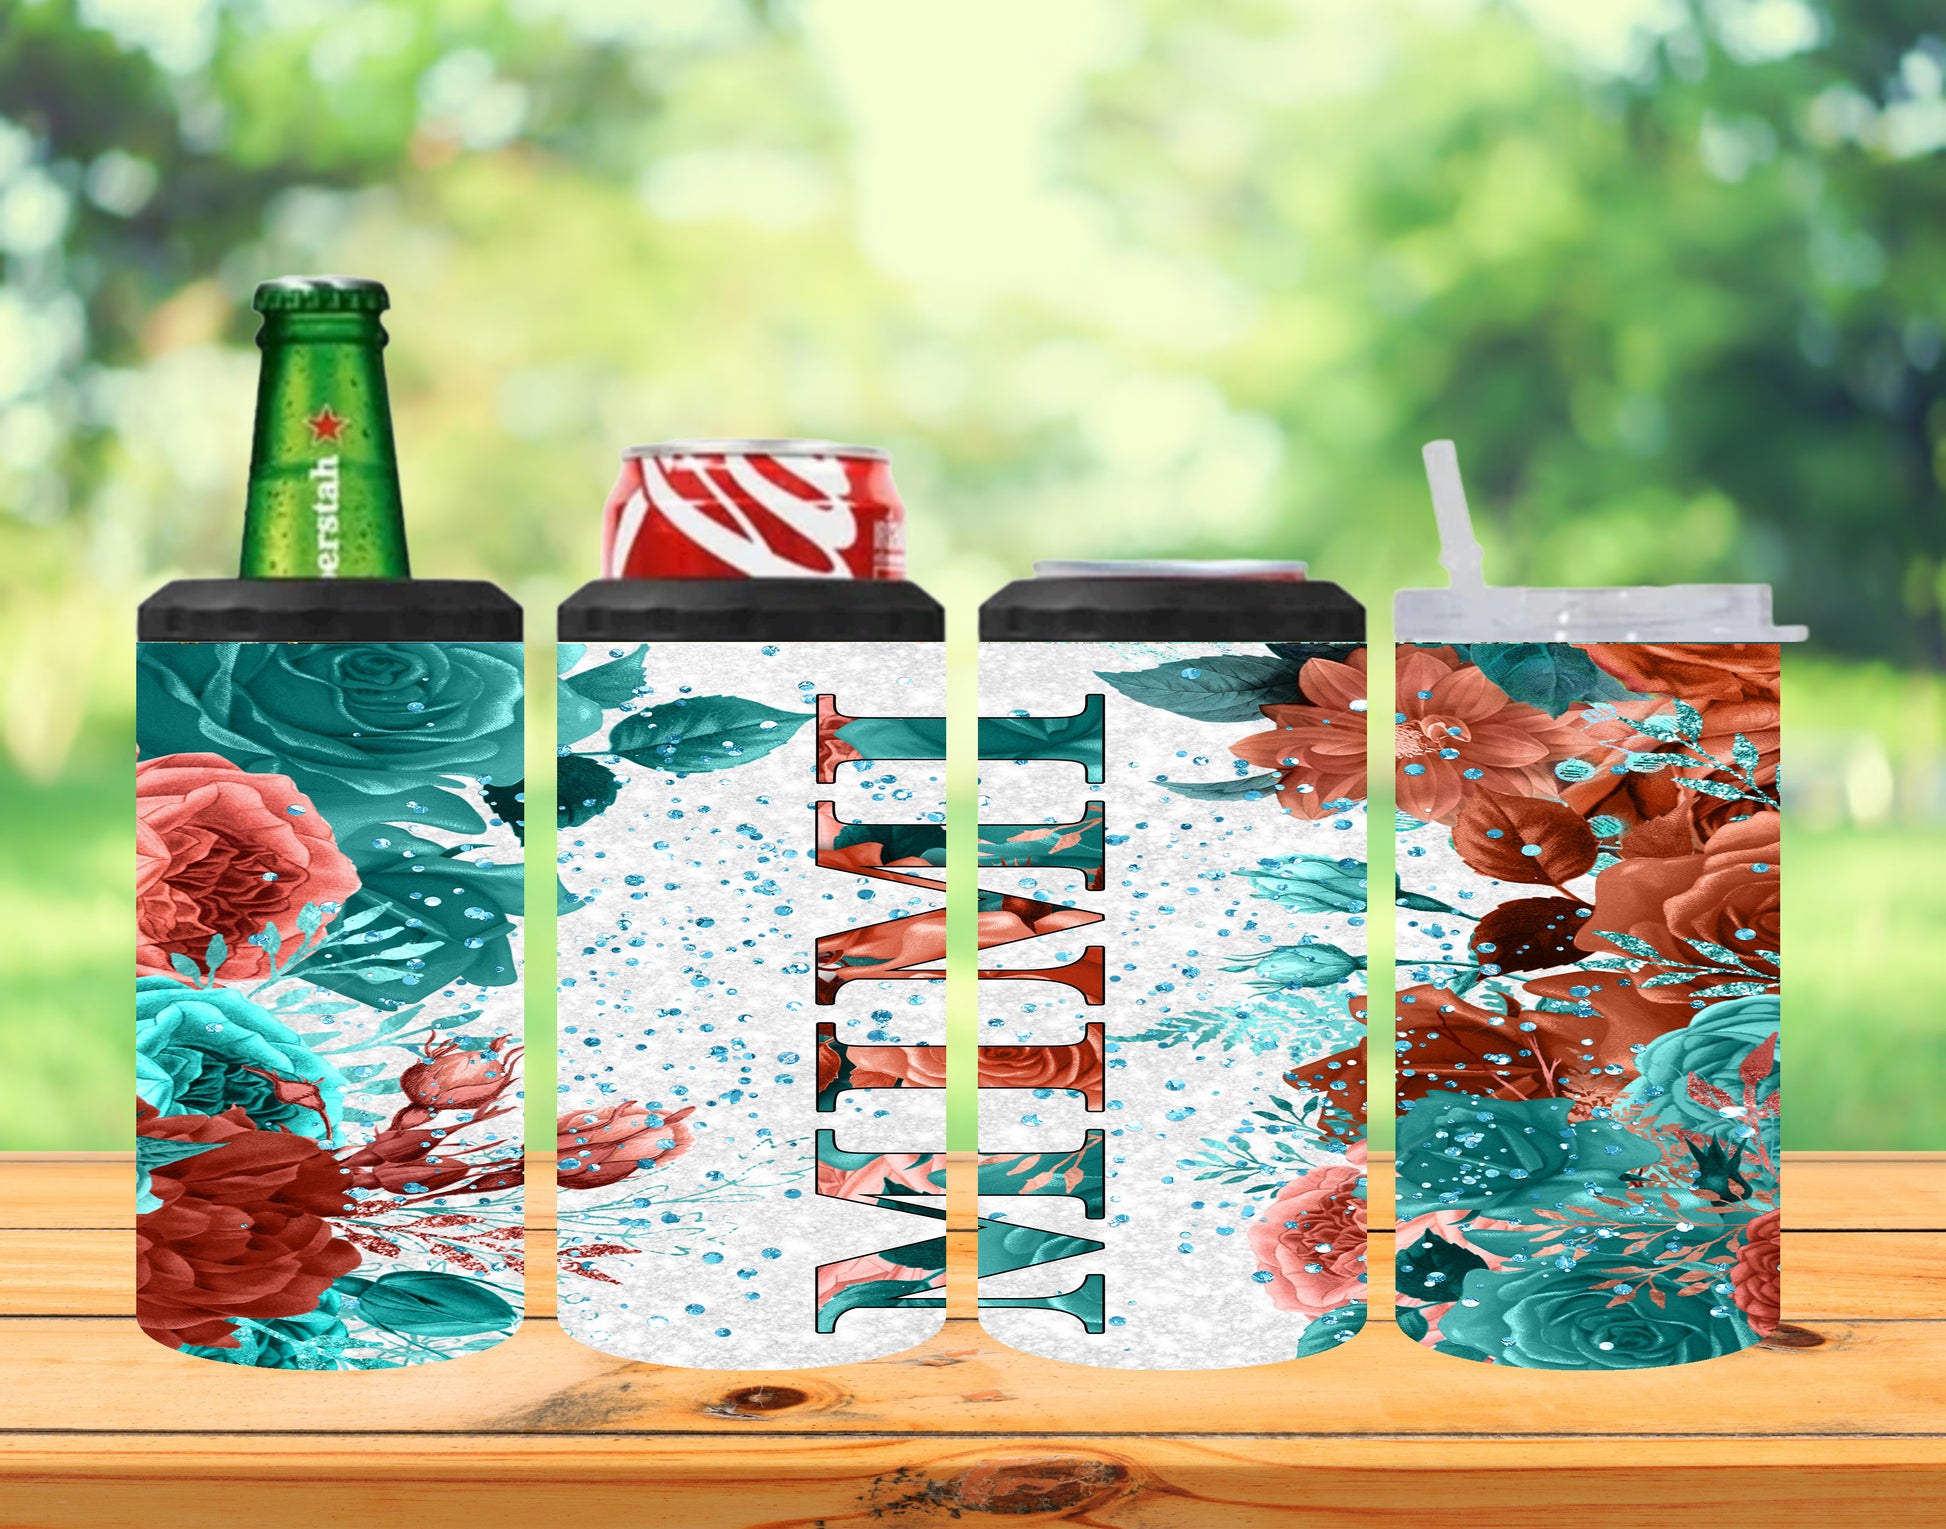 MIMI TEAL FLORAL 4 IN 1 SUBLIMATION KOOZIE